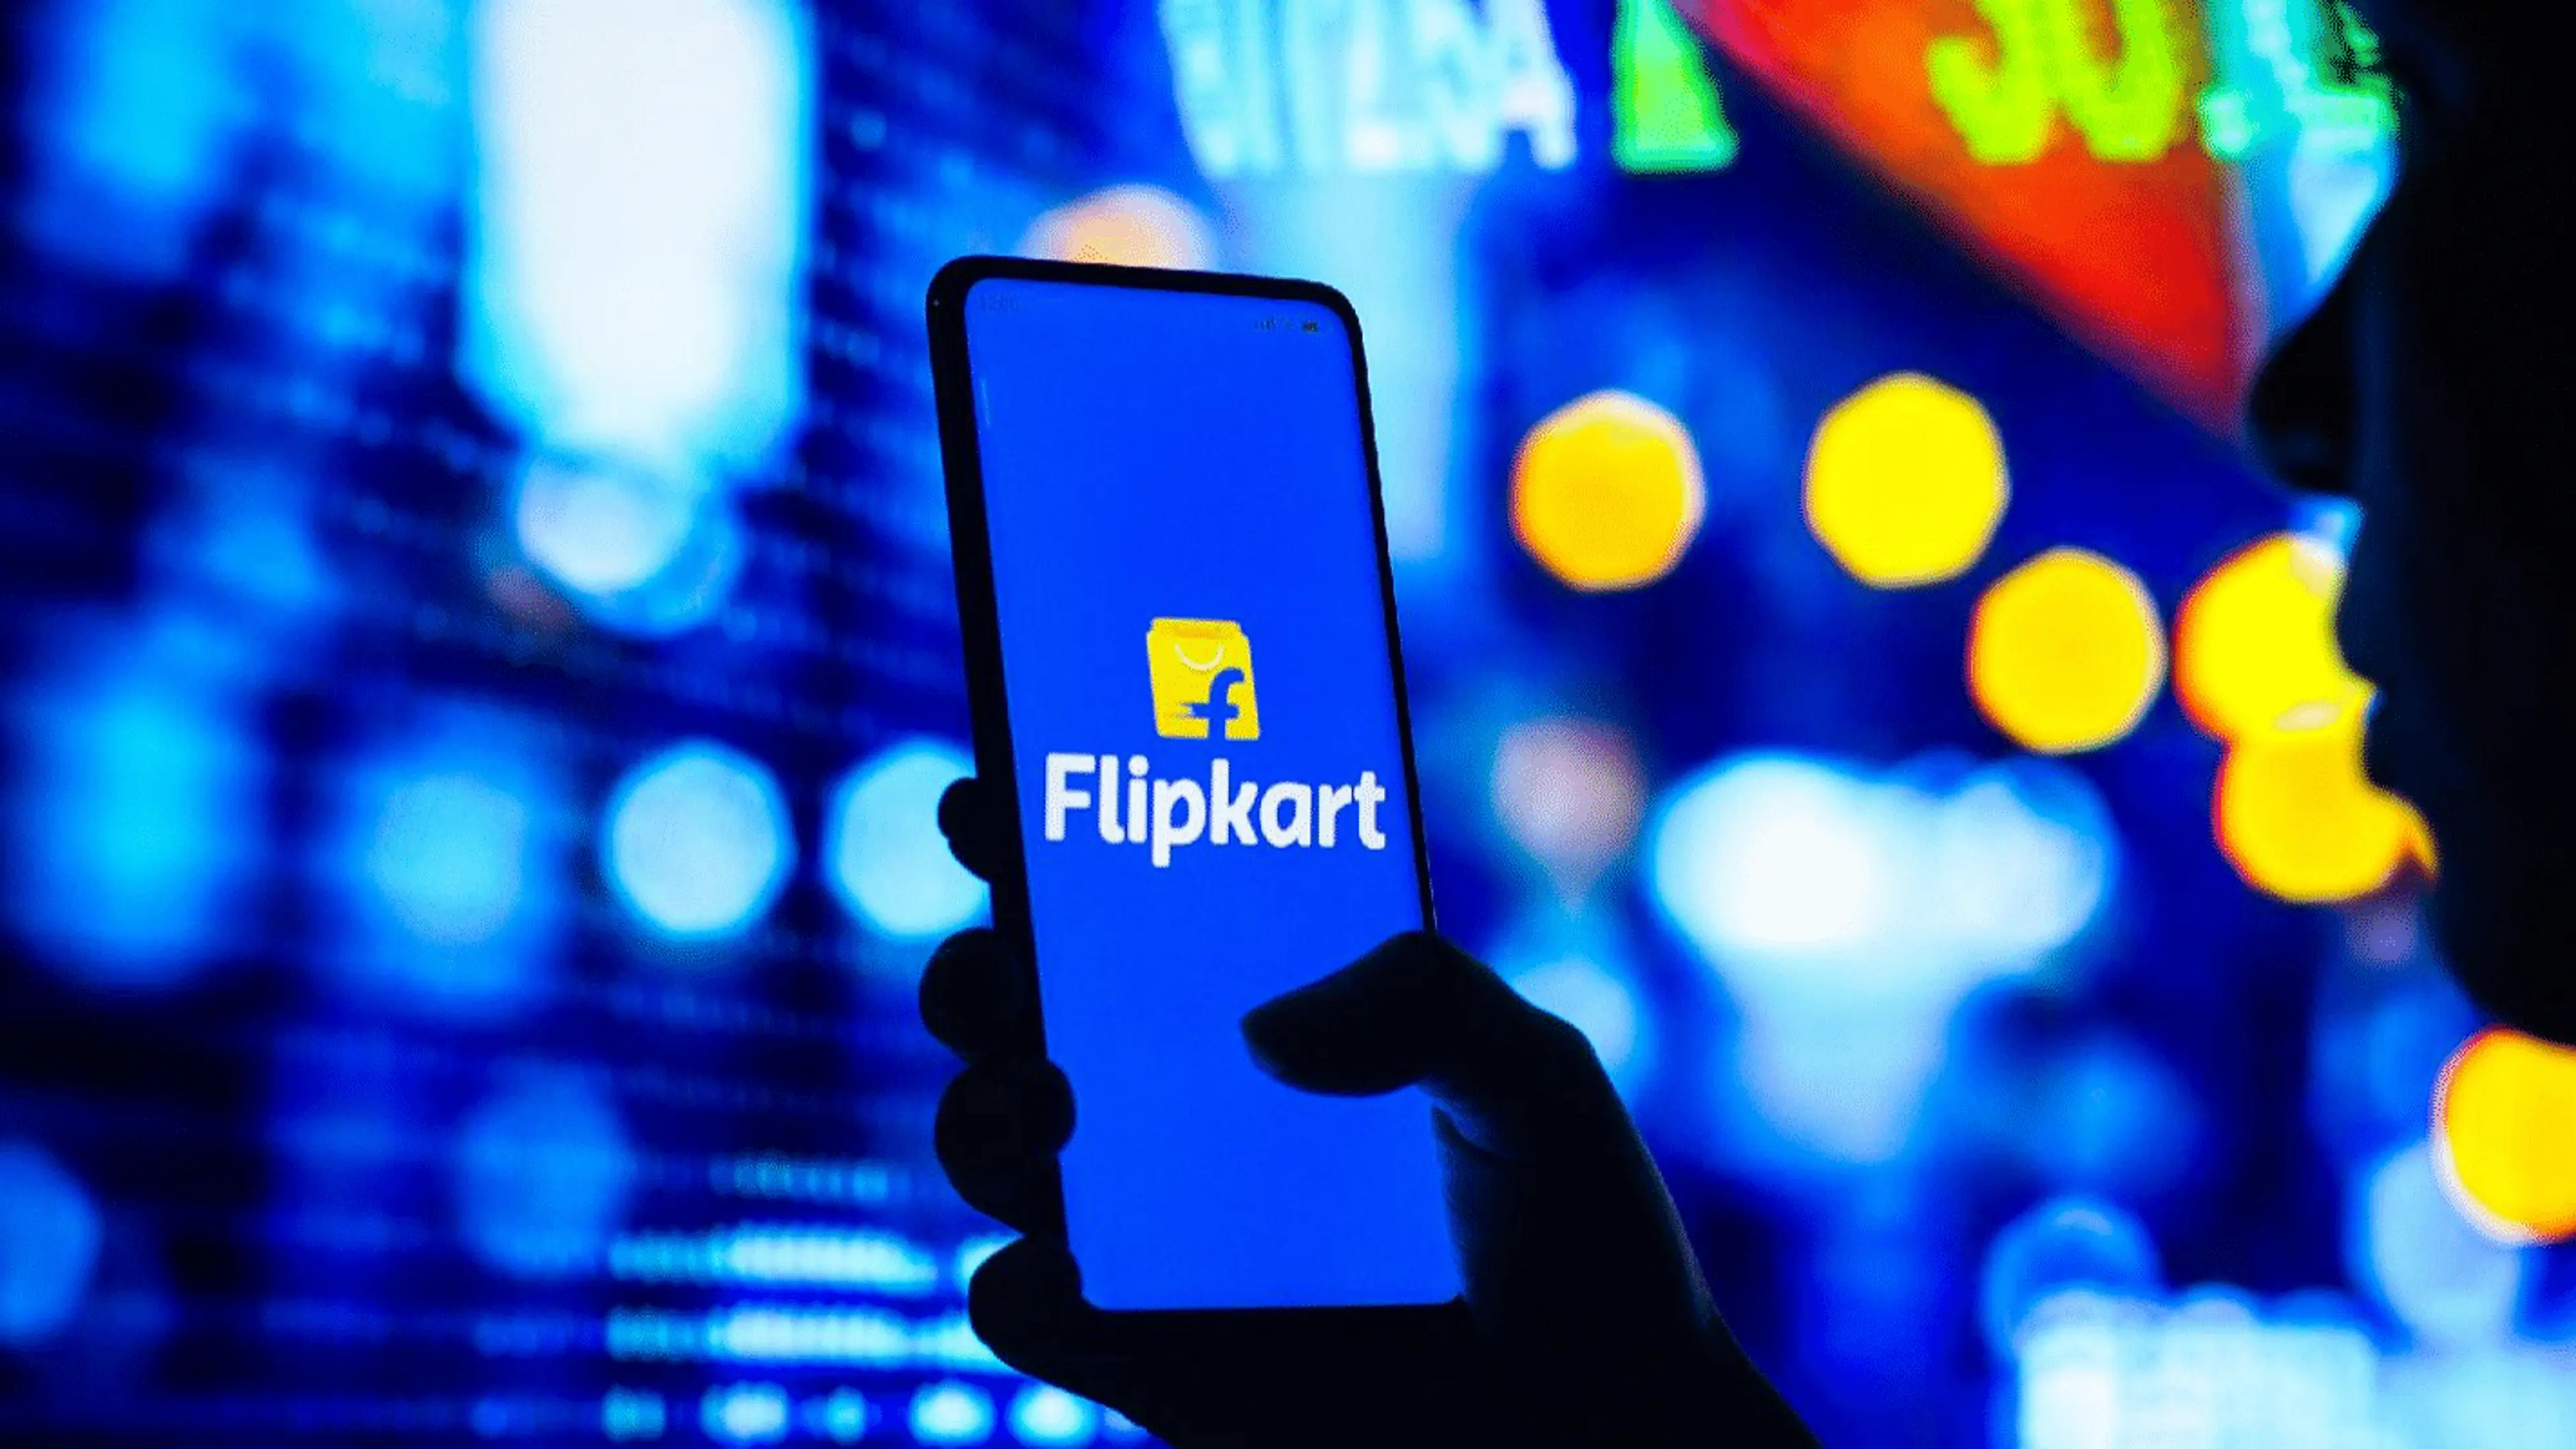 Flipkart to introduce same-day delivery for ecommerce orders in February